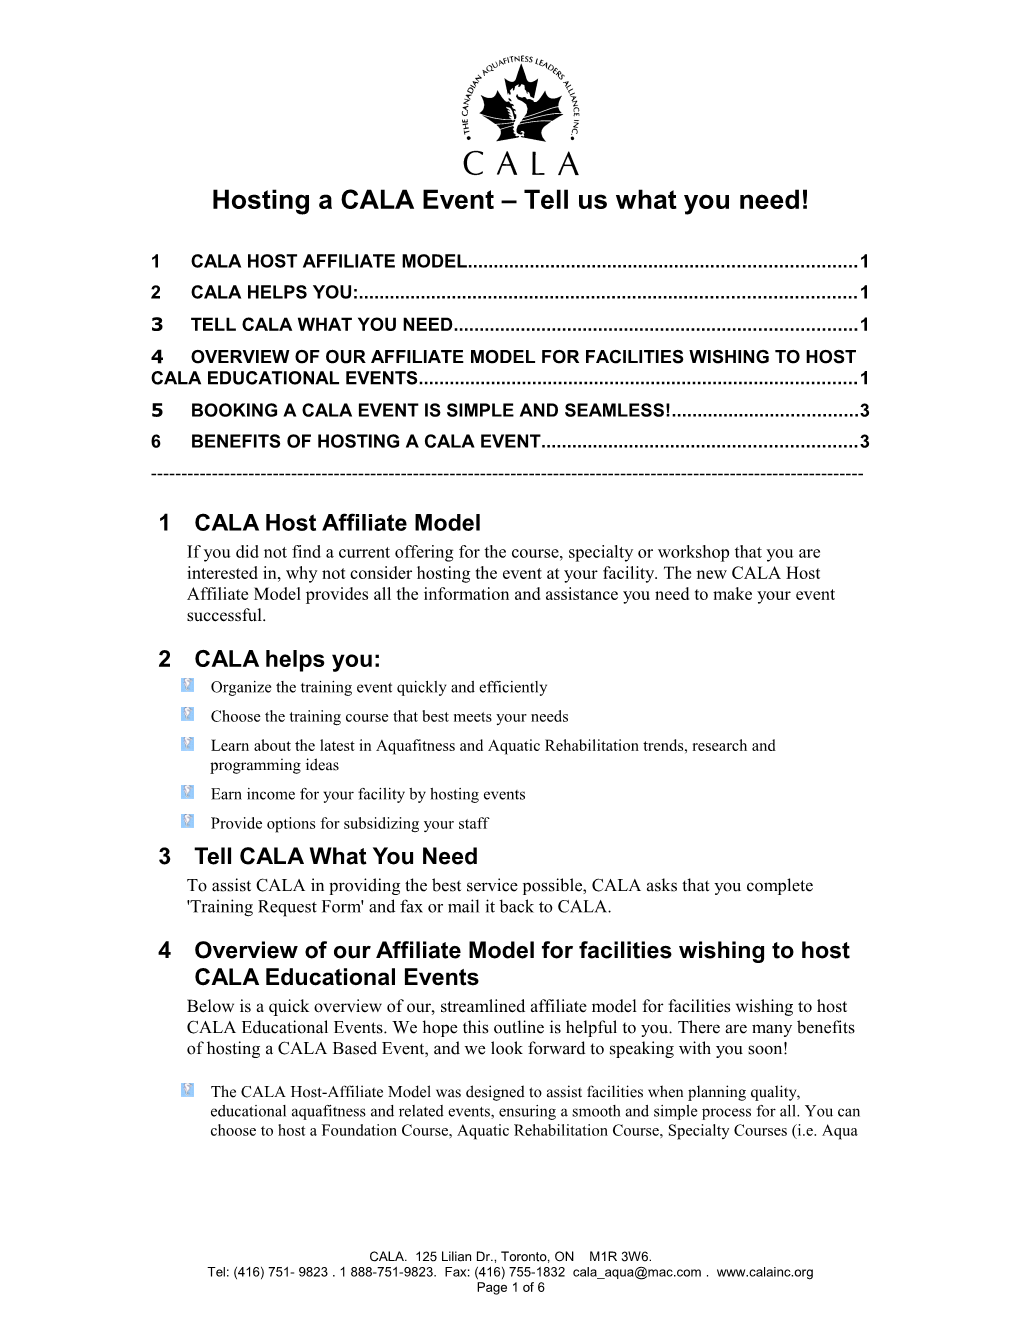 Hosting a CALA Event Tell Us What You Need